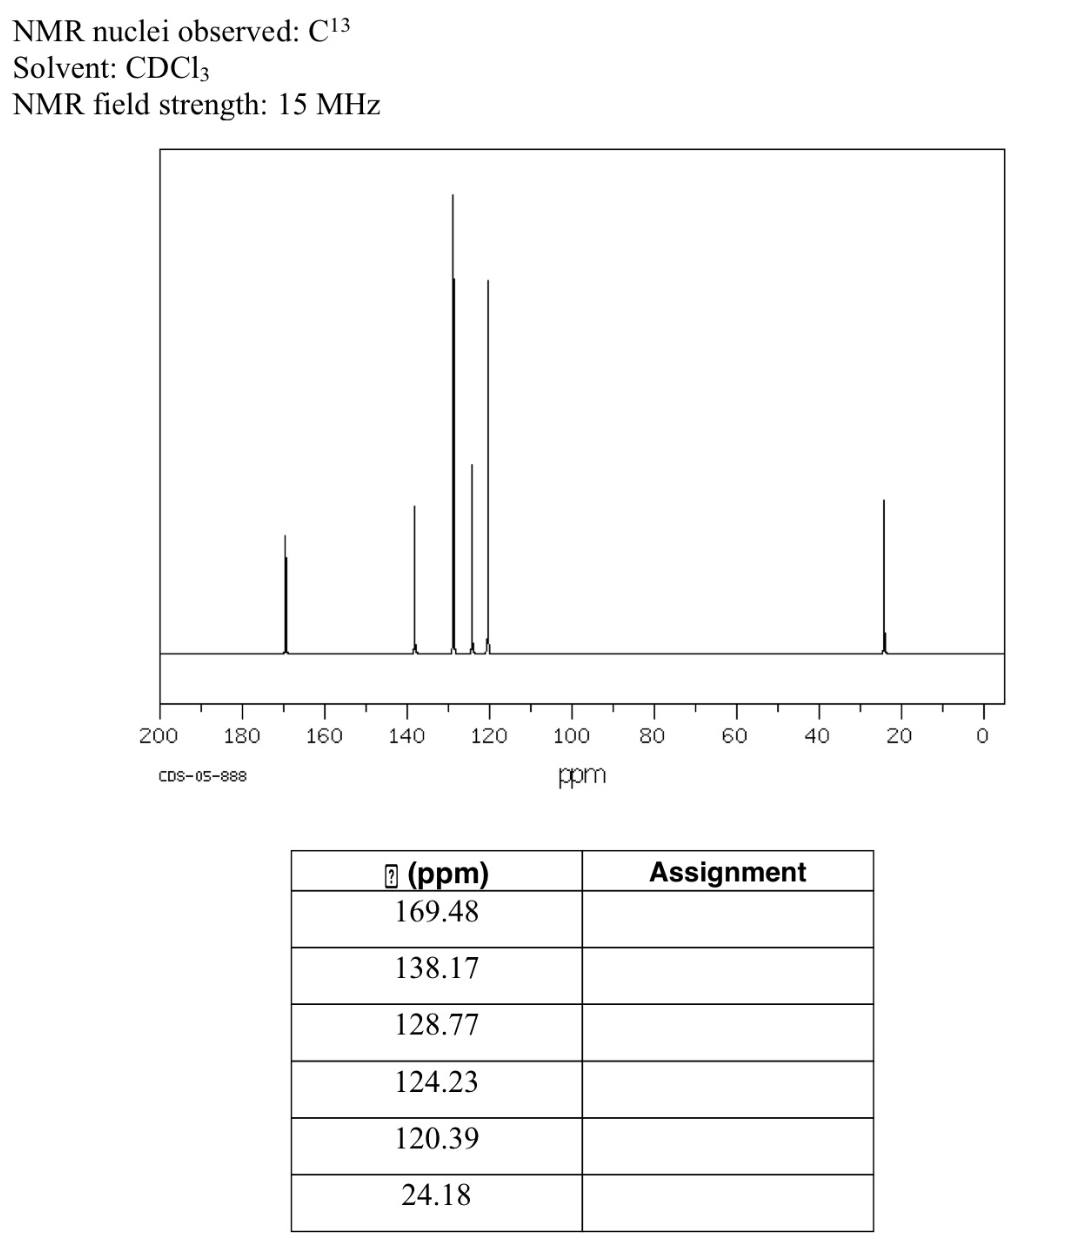 NMR nuclei observed: C13
Solvent: CDC13
NMR field strength: 15 MHz
200
180
160
140
120
100
80
60
40
20
ppm
CDS-05-888
® (ppm)
169.48
Assignment
138.17
128.77
124.23
120.39
24.18
